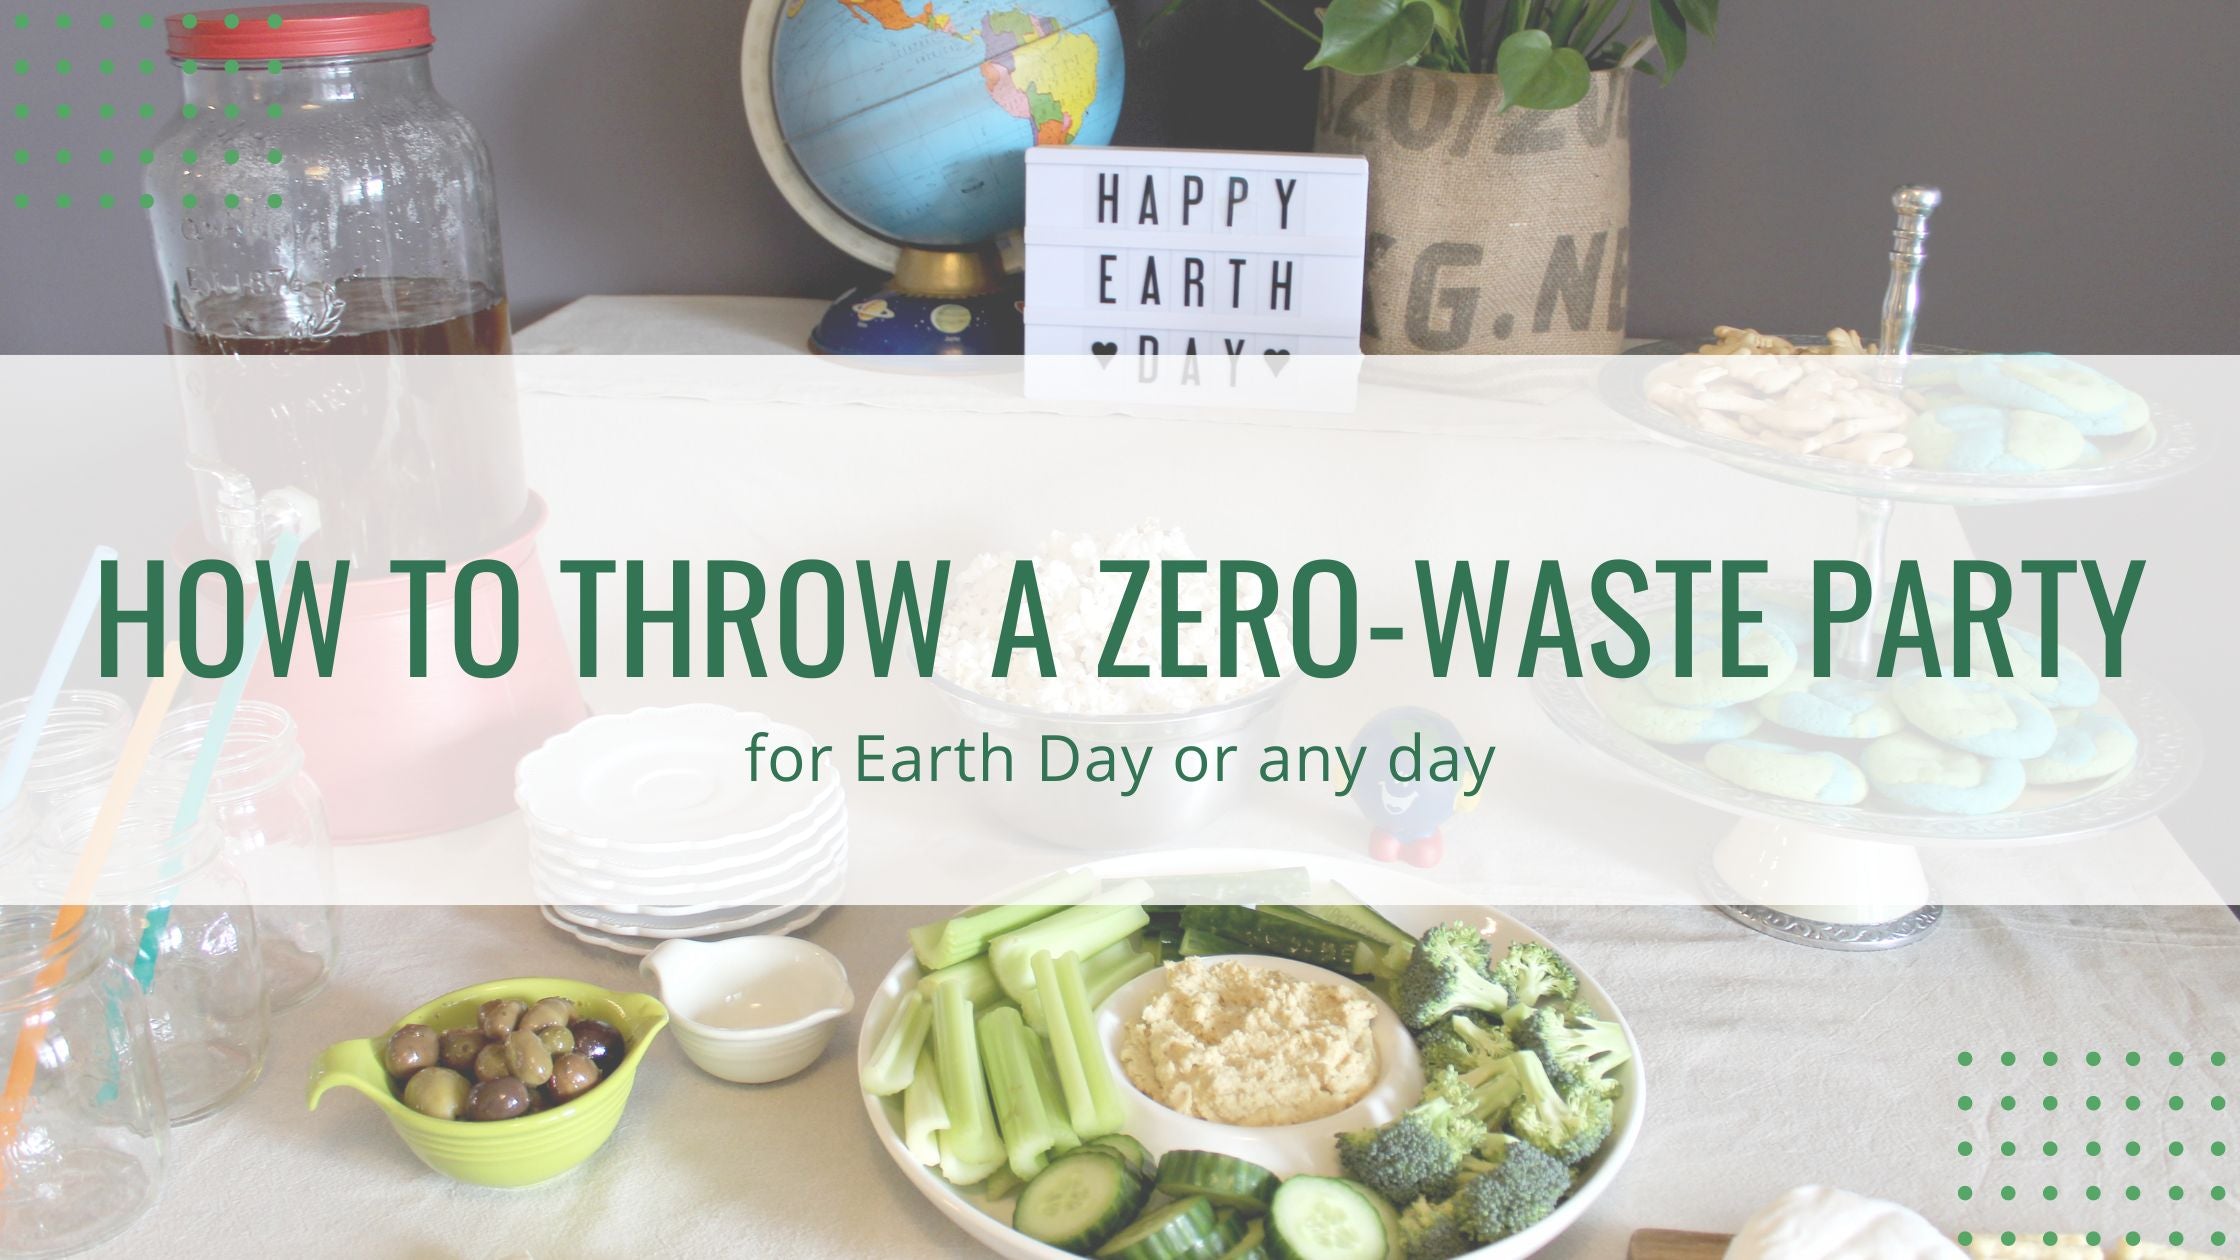 How to throw a zero-waste party for Earth Day